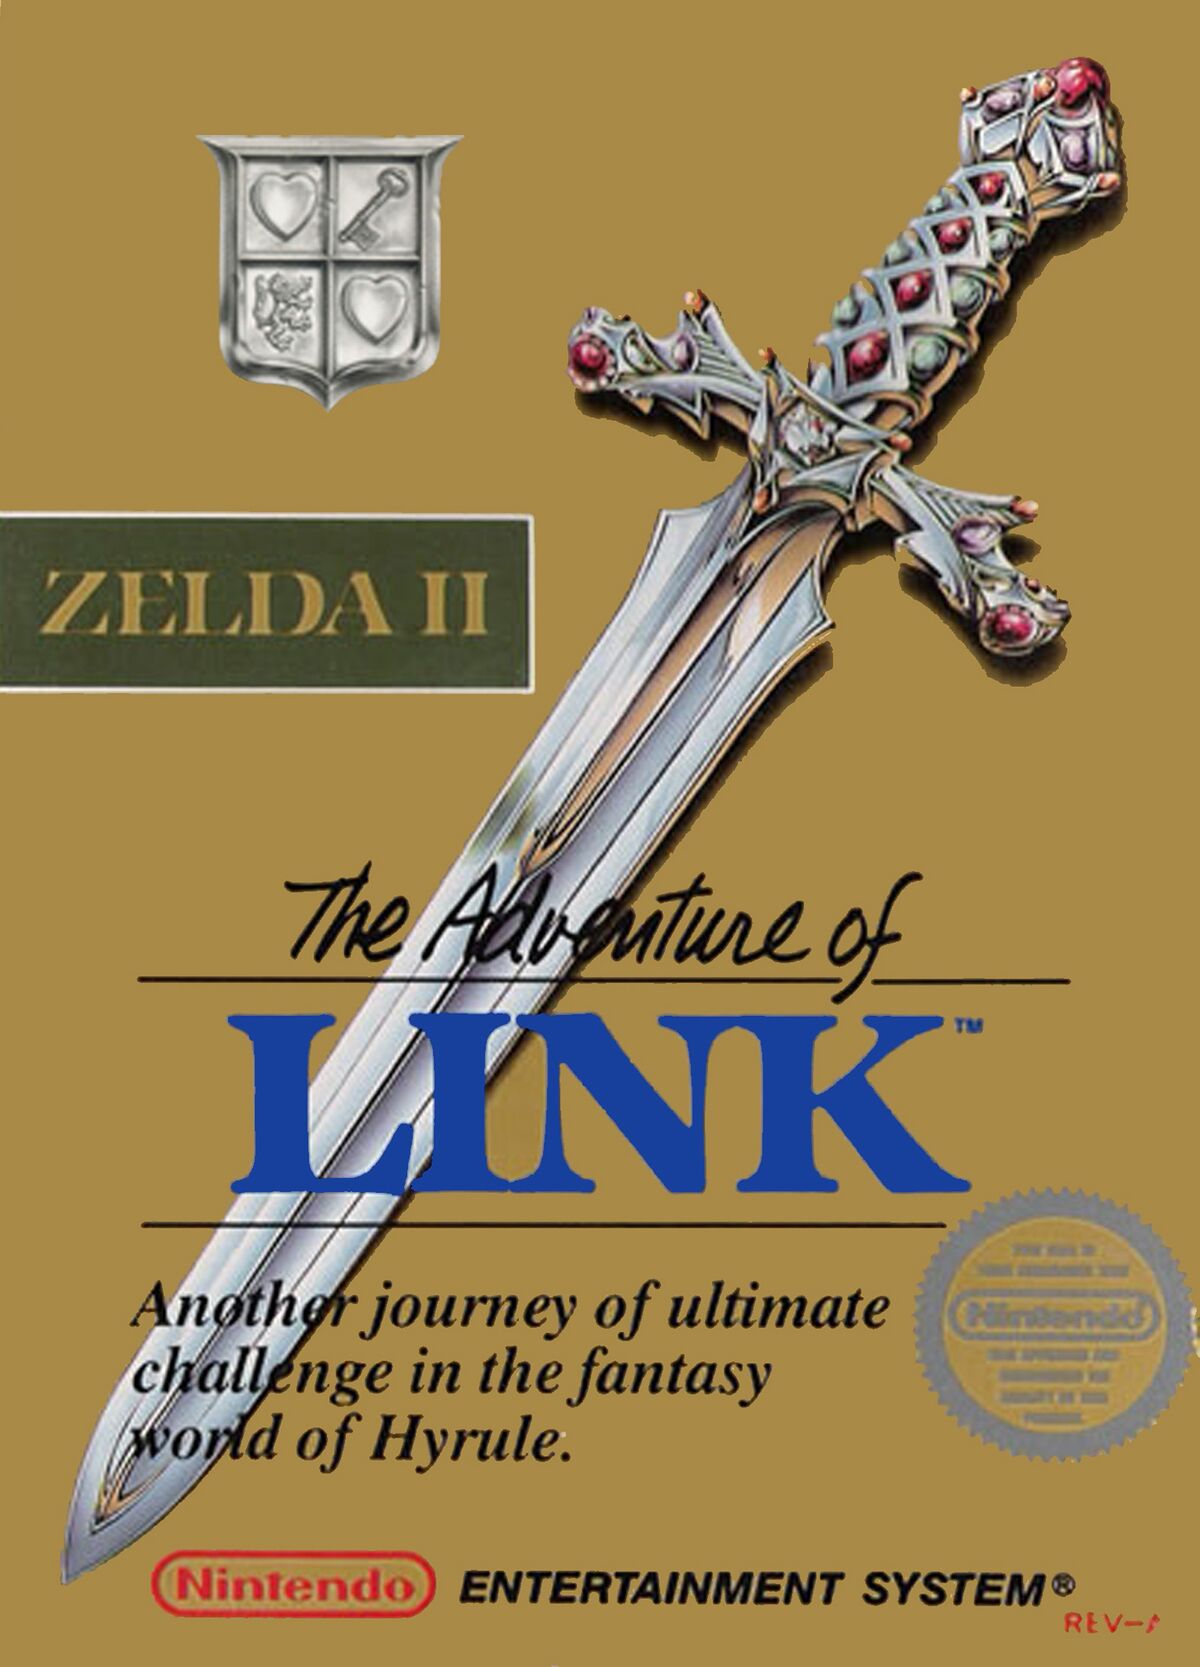 The Legend of Zelda: Collector's Edition - Dolphin Emulator Wiki